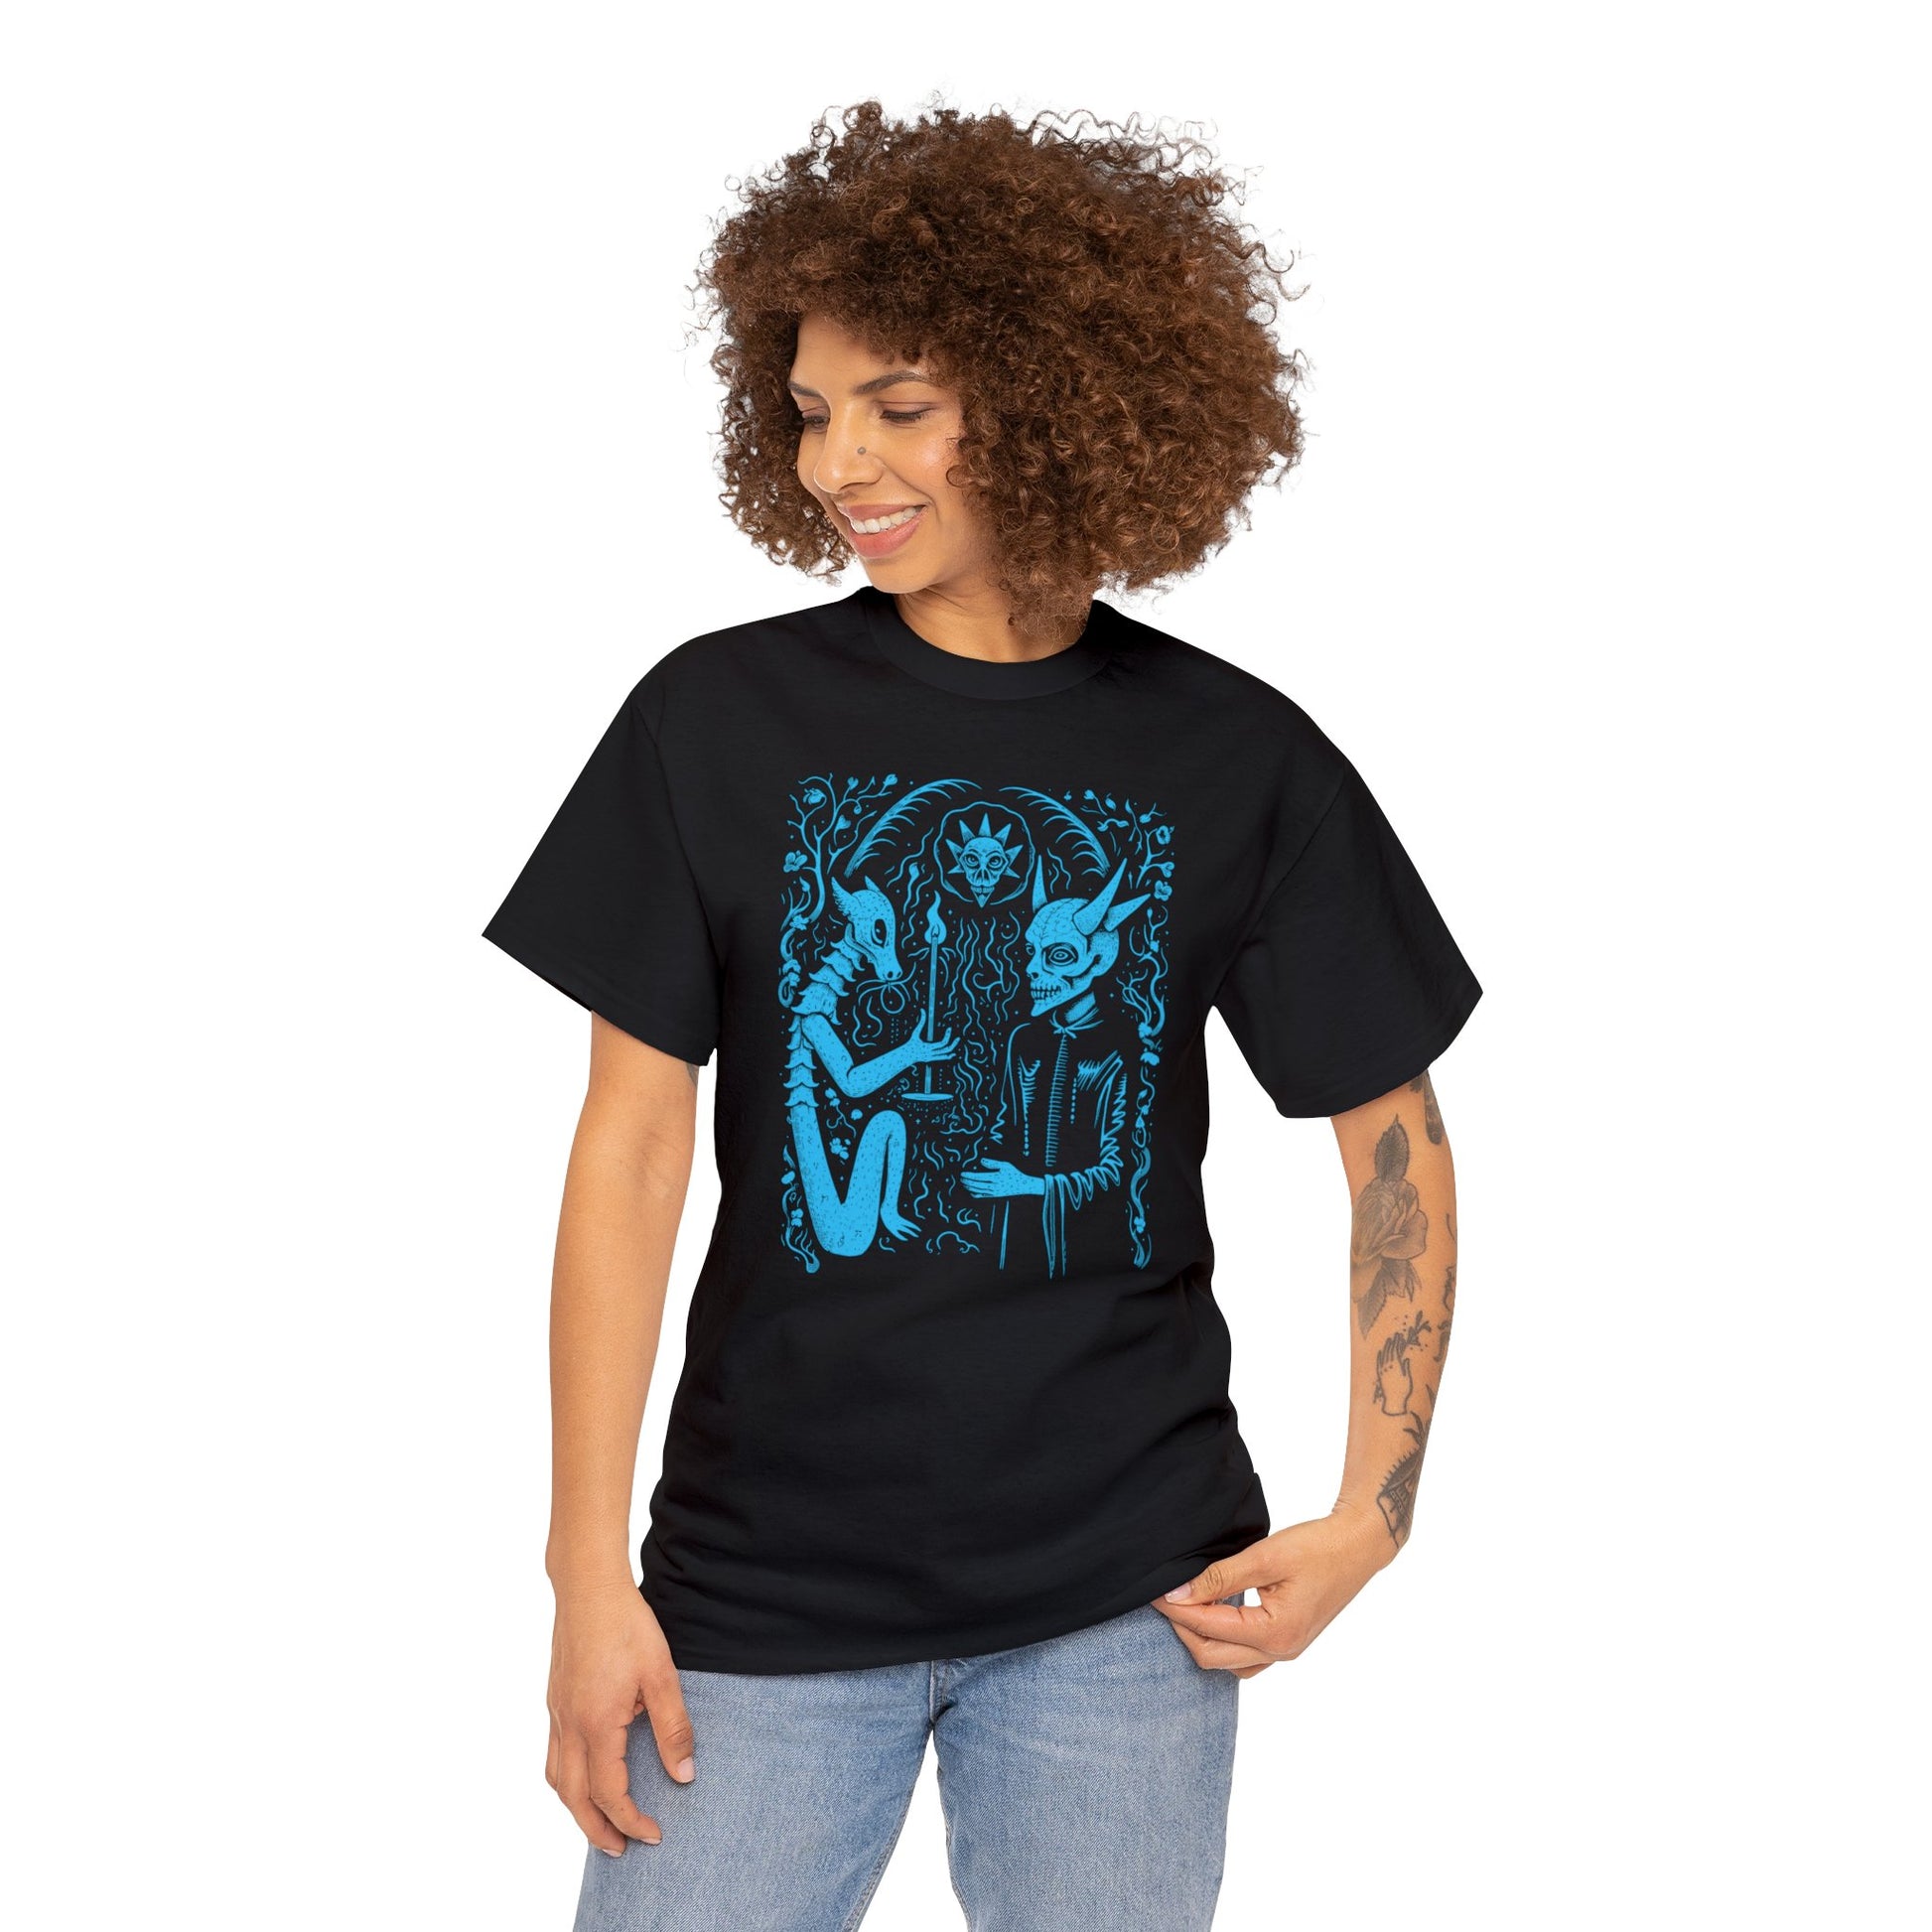 Unisex T-shirt Pact with the Devil in Blue - Frogos Design